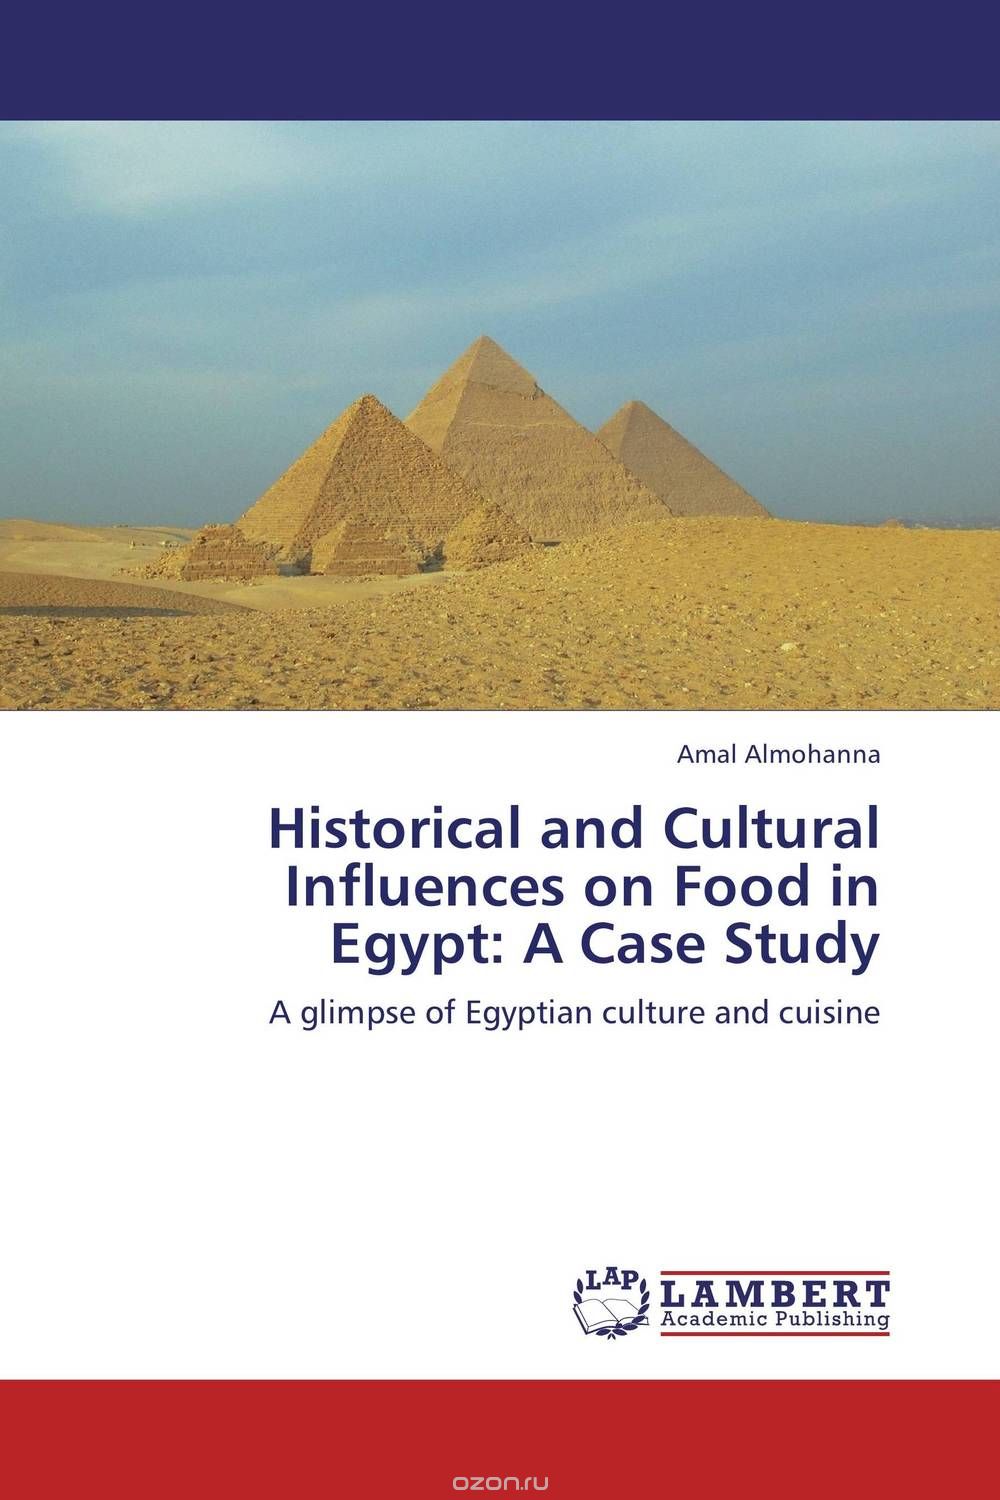 Скачать книгу "Historical and Cultural Influences on Food in Egypt: A Case Study"